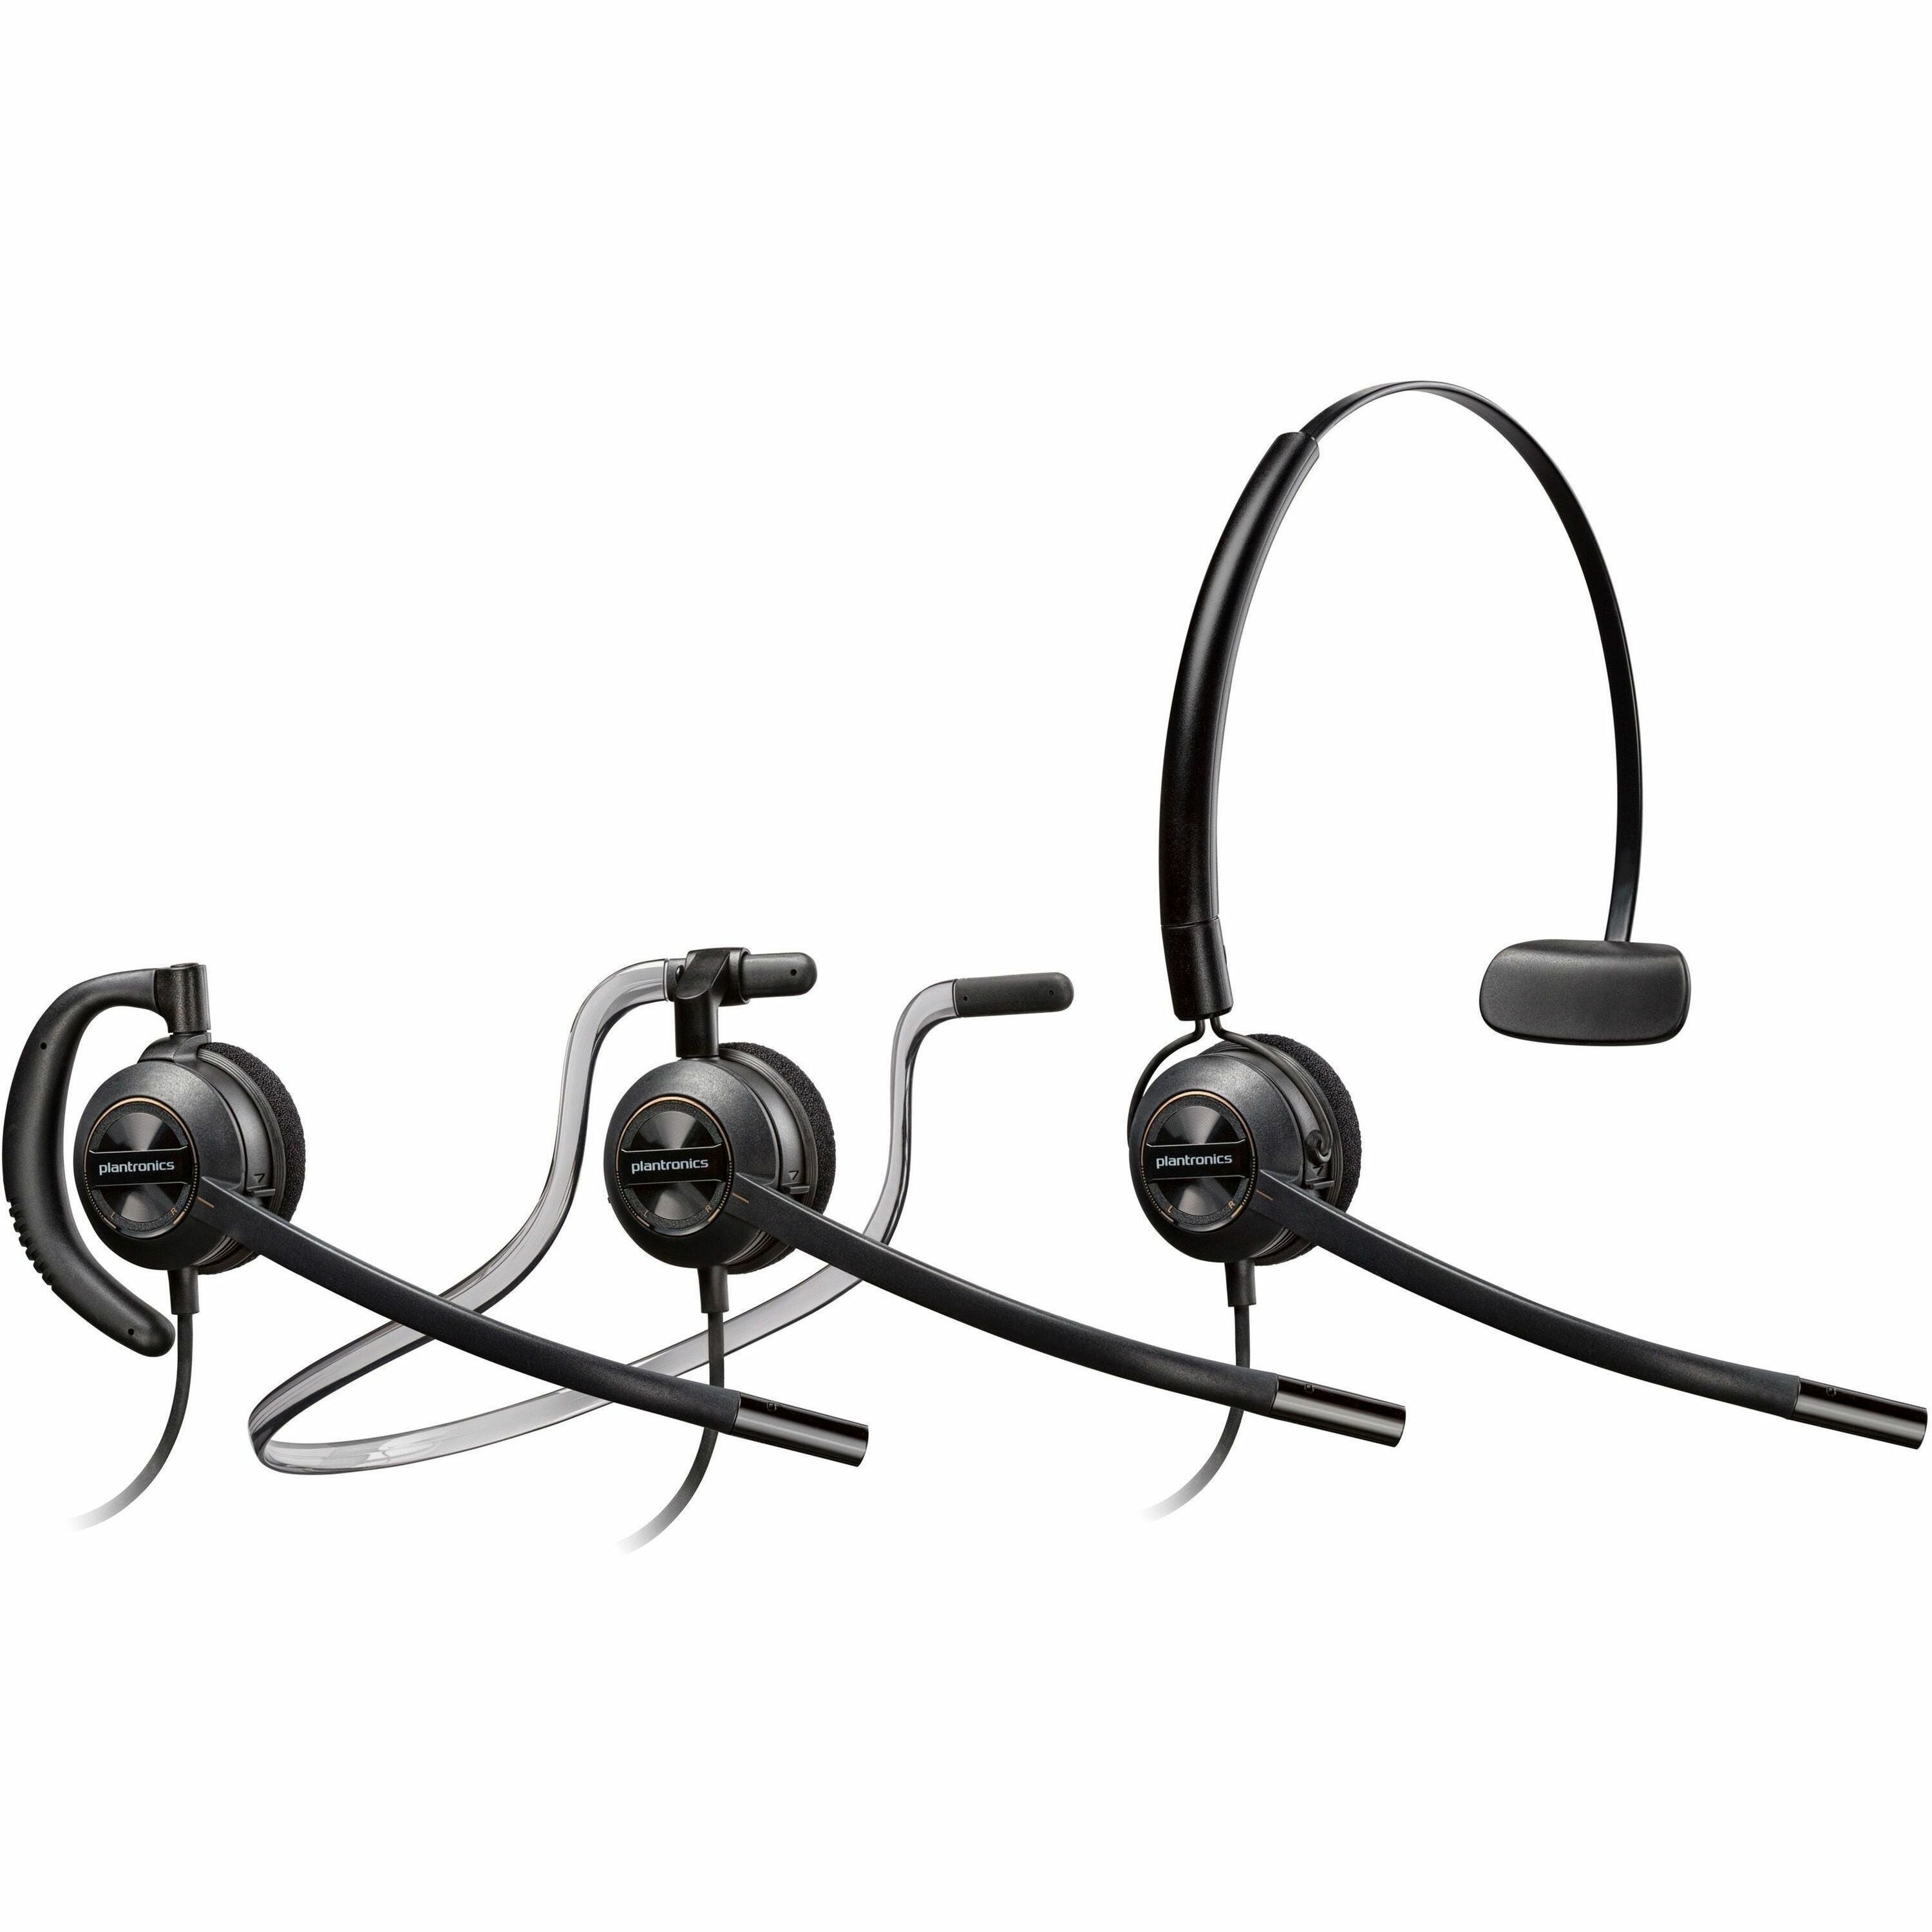 poly-encorepro-hw540-convertible-headset-mono-mini-phone-35mm-wired-20-hz-16-khz-on-ear-monaural-ear-cup-292-ft-cable-omni-directional-noise-cancelling-microphone-black_hew783p0aa - 1